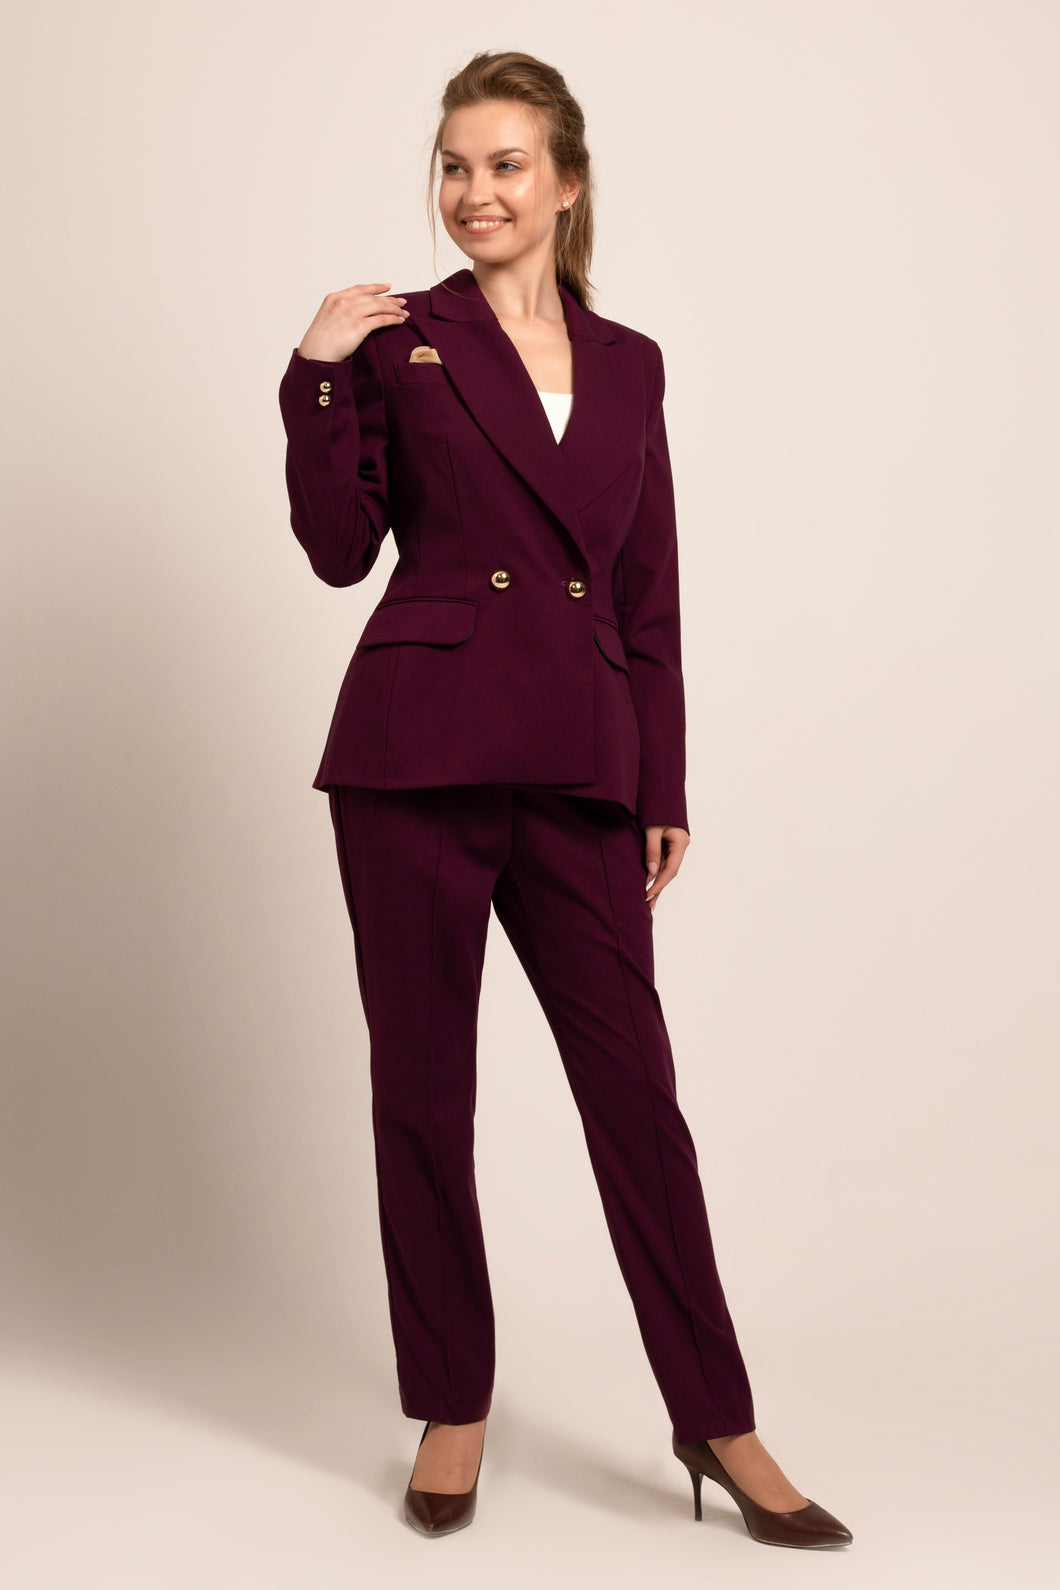 Double breasted suit blazer in purple